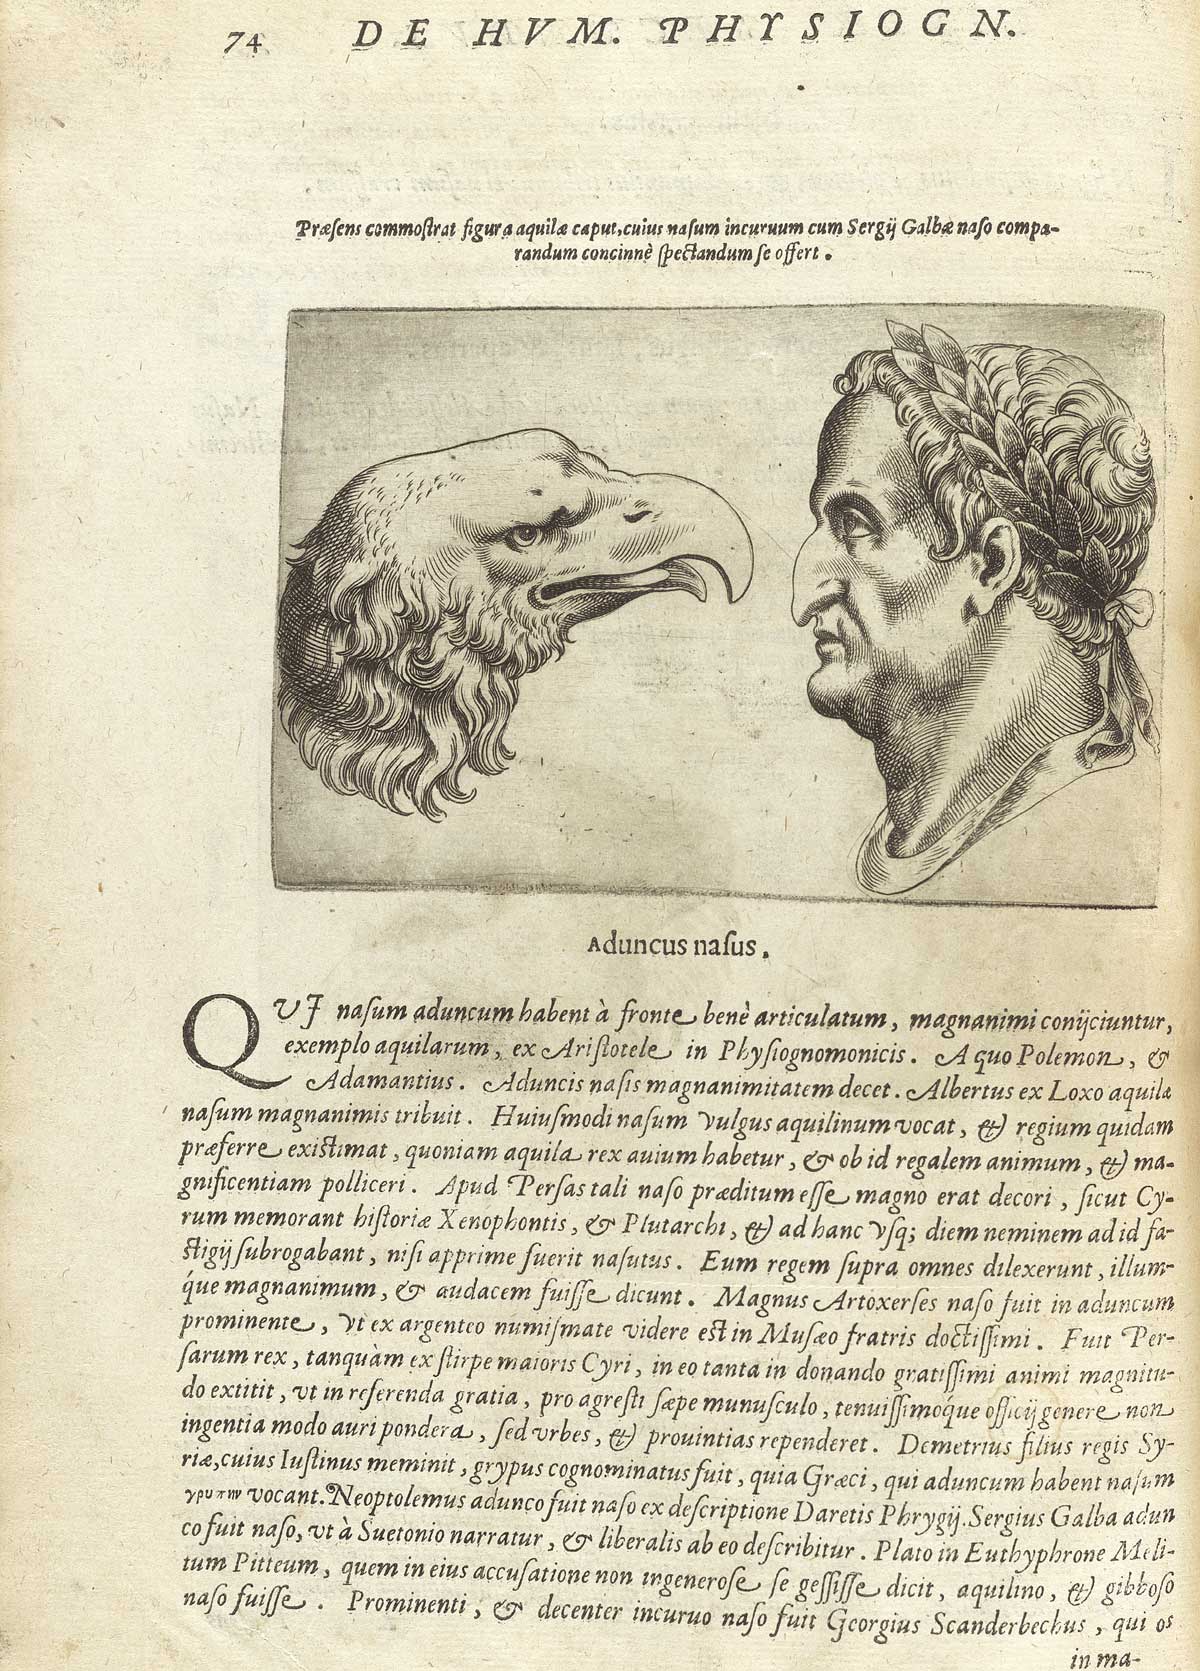 Page 74 of Giambattista della Porta's De humana physiognomonia libri IIII, featuring the head and shoulders right side view of an eagle facing a man with a hooked nose.